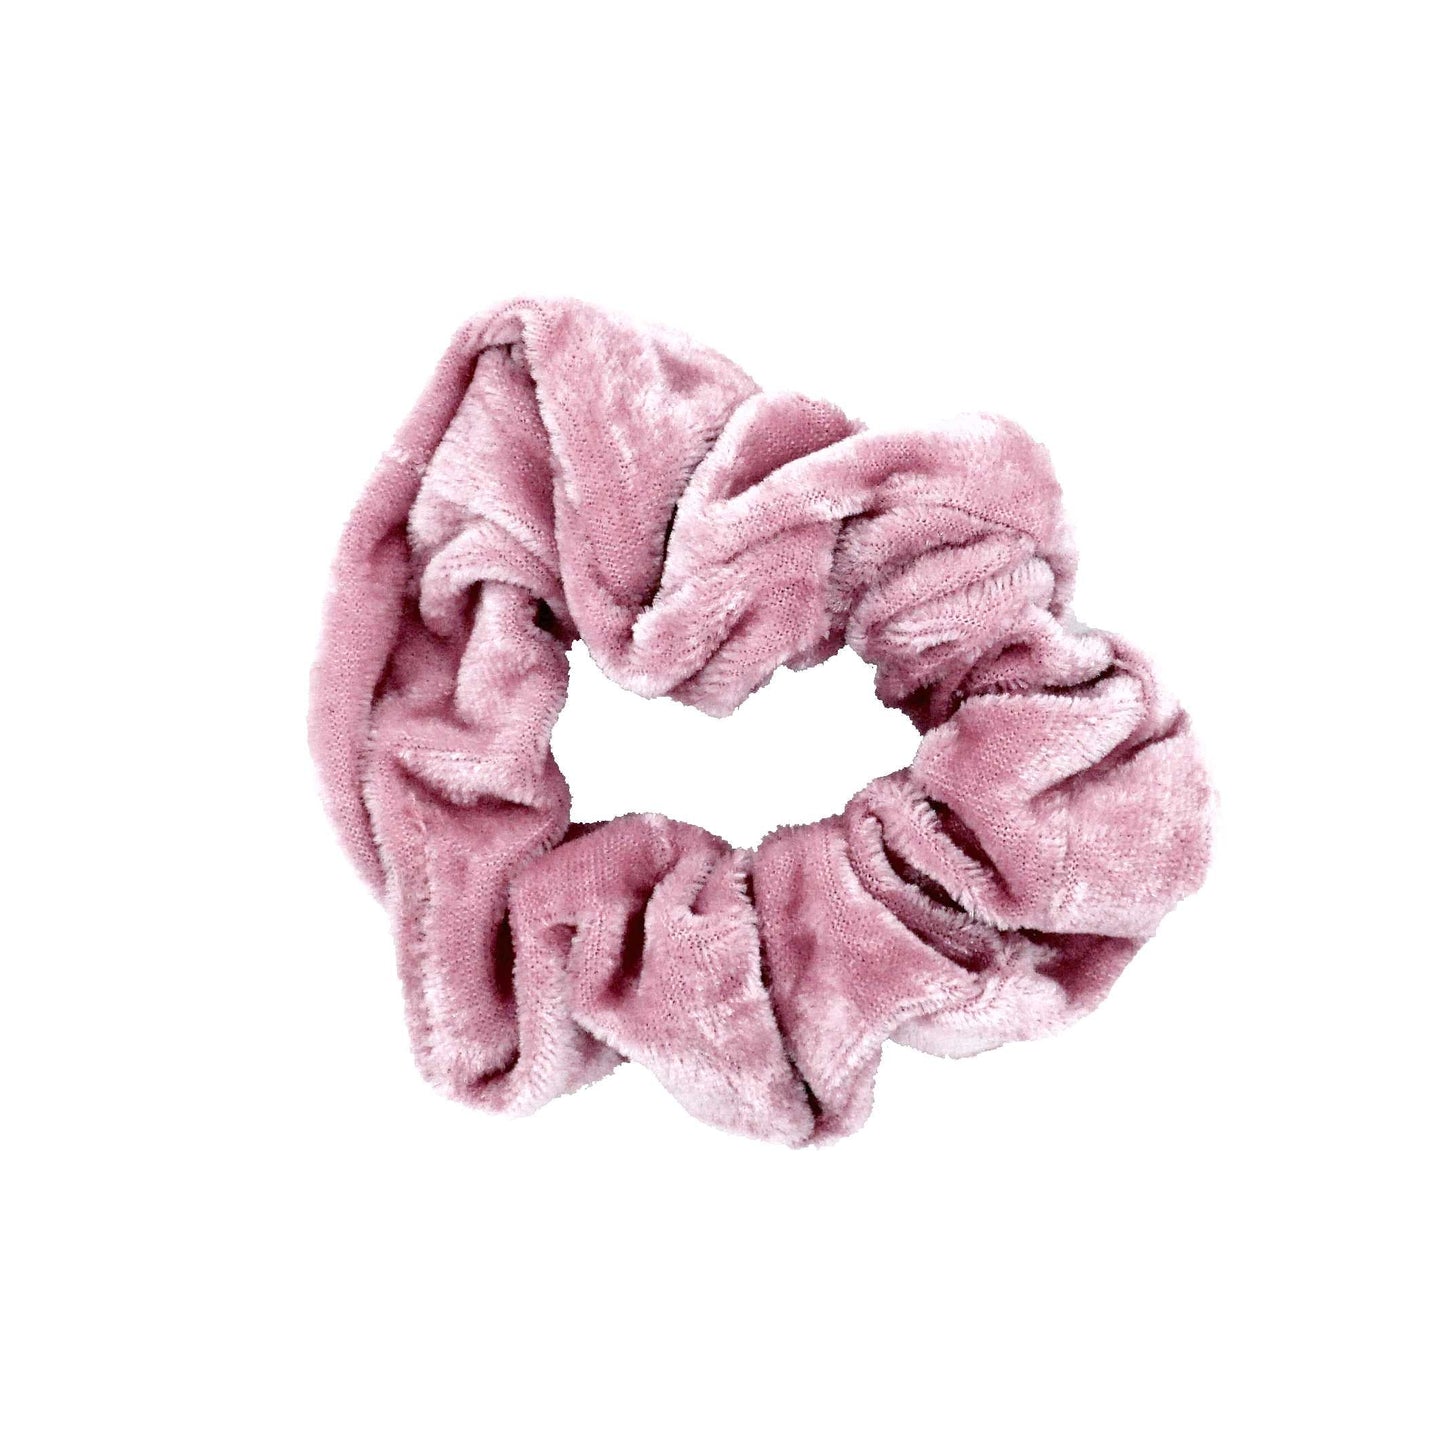 Amelia Beauty Products, White and Pink Velvet Velvet Scrunchies, 3.5in Diameter, Gentle on Hair, Strong Hold, No Snag, No Dents or Creases. 8 Pack - 12 Retail Packs